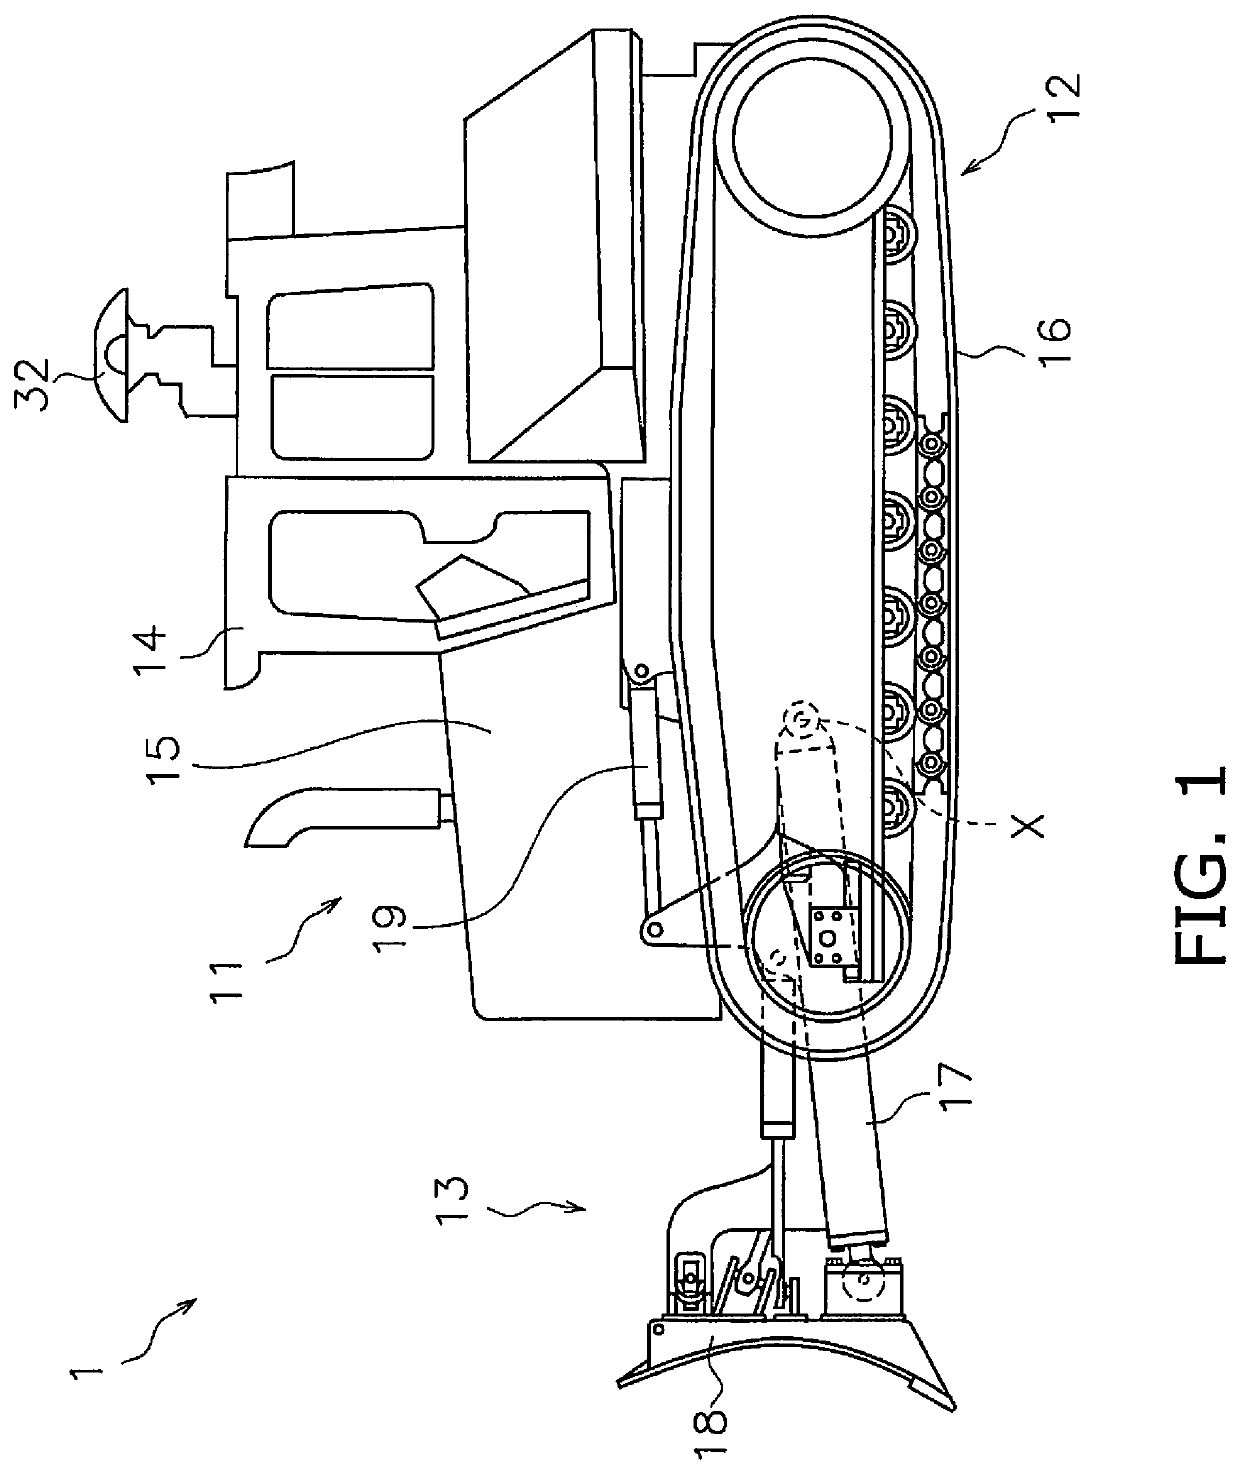 Control system for work vehicle, method and work vehicle